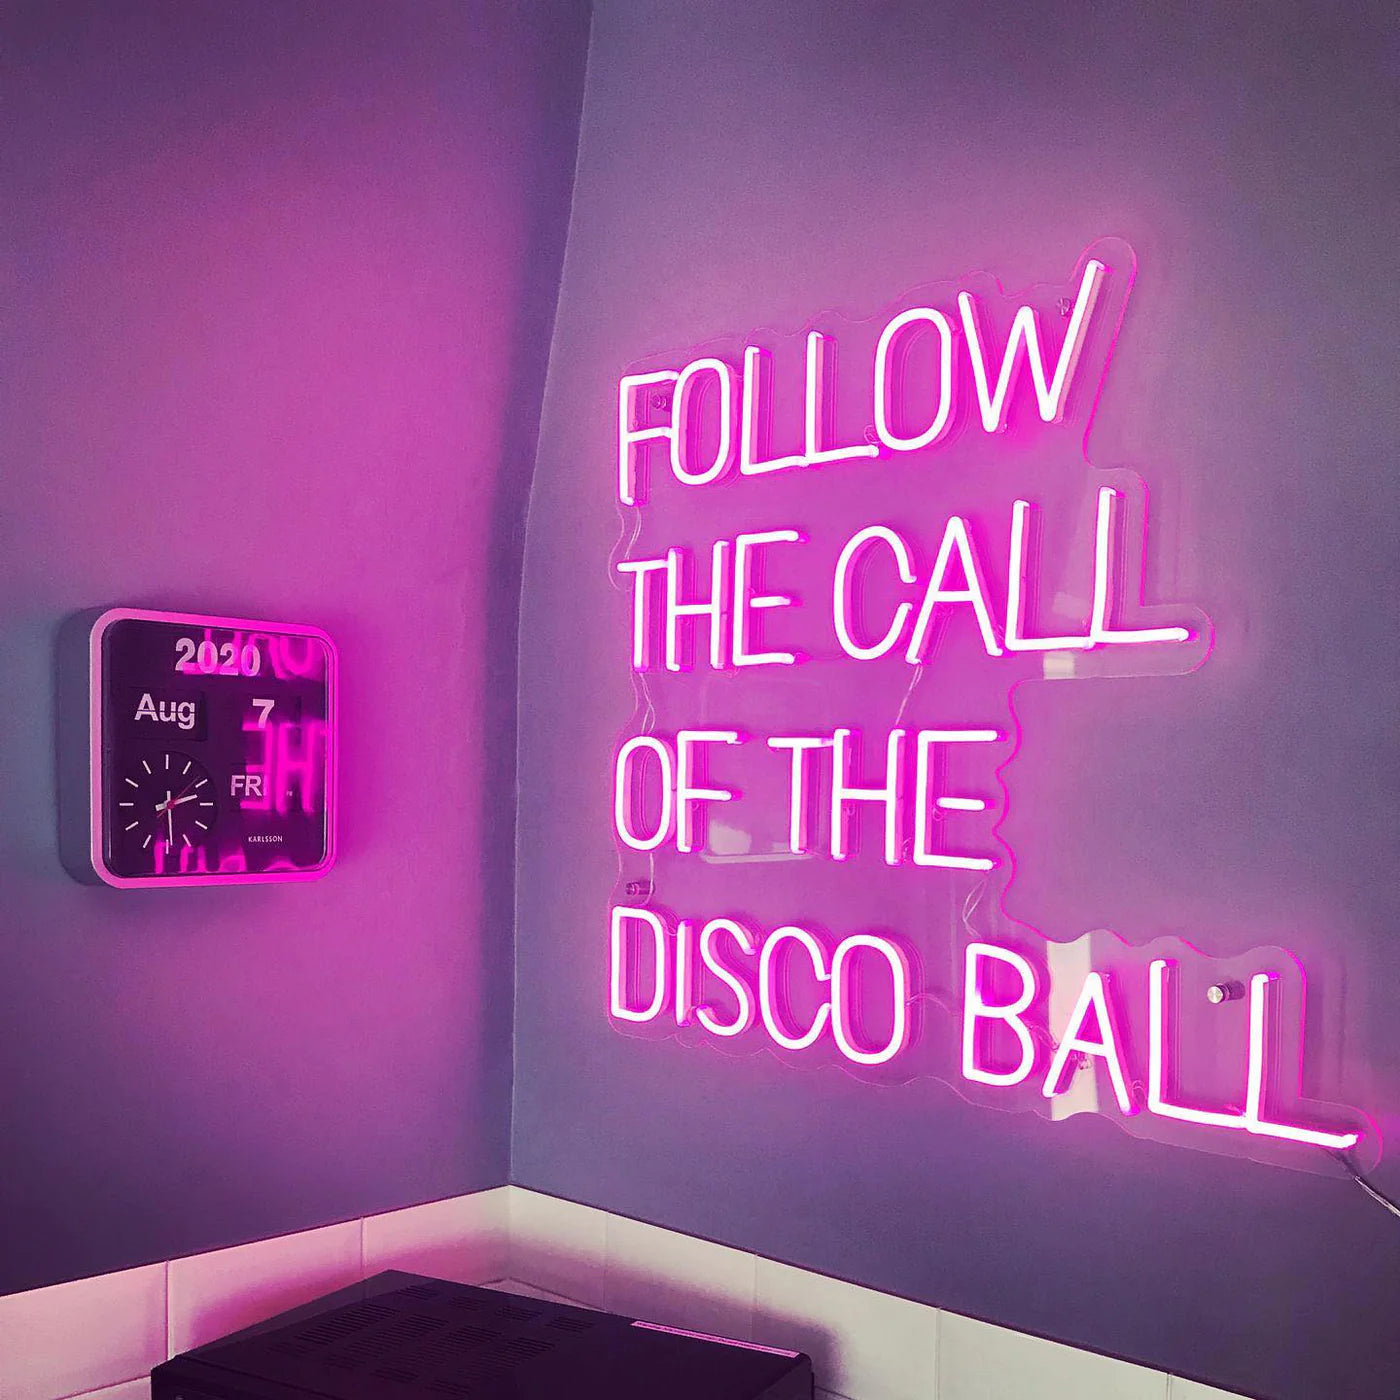 "FOLLOW THE CALL OF THE DISCO BALL" LED Neonschild